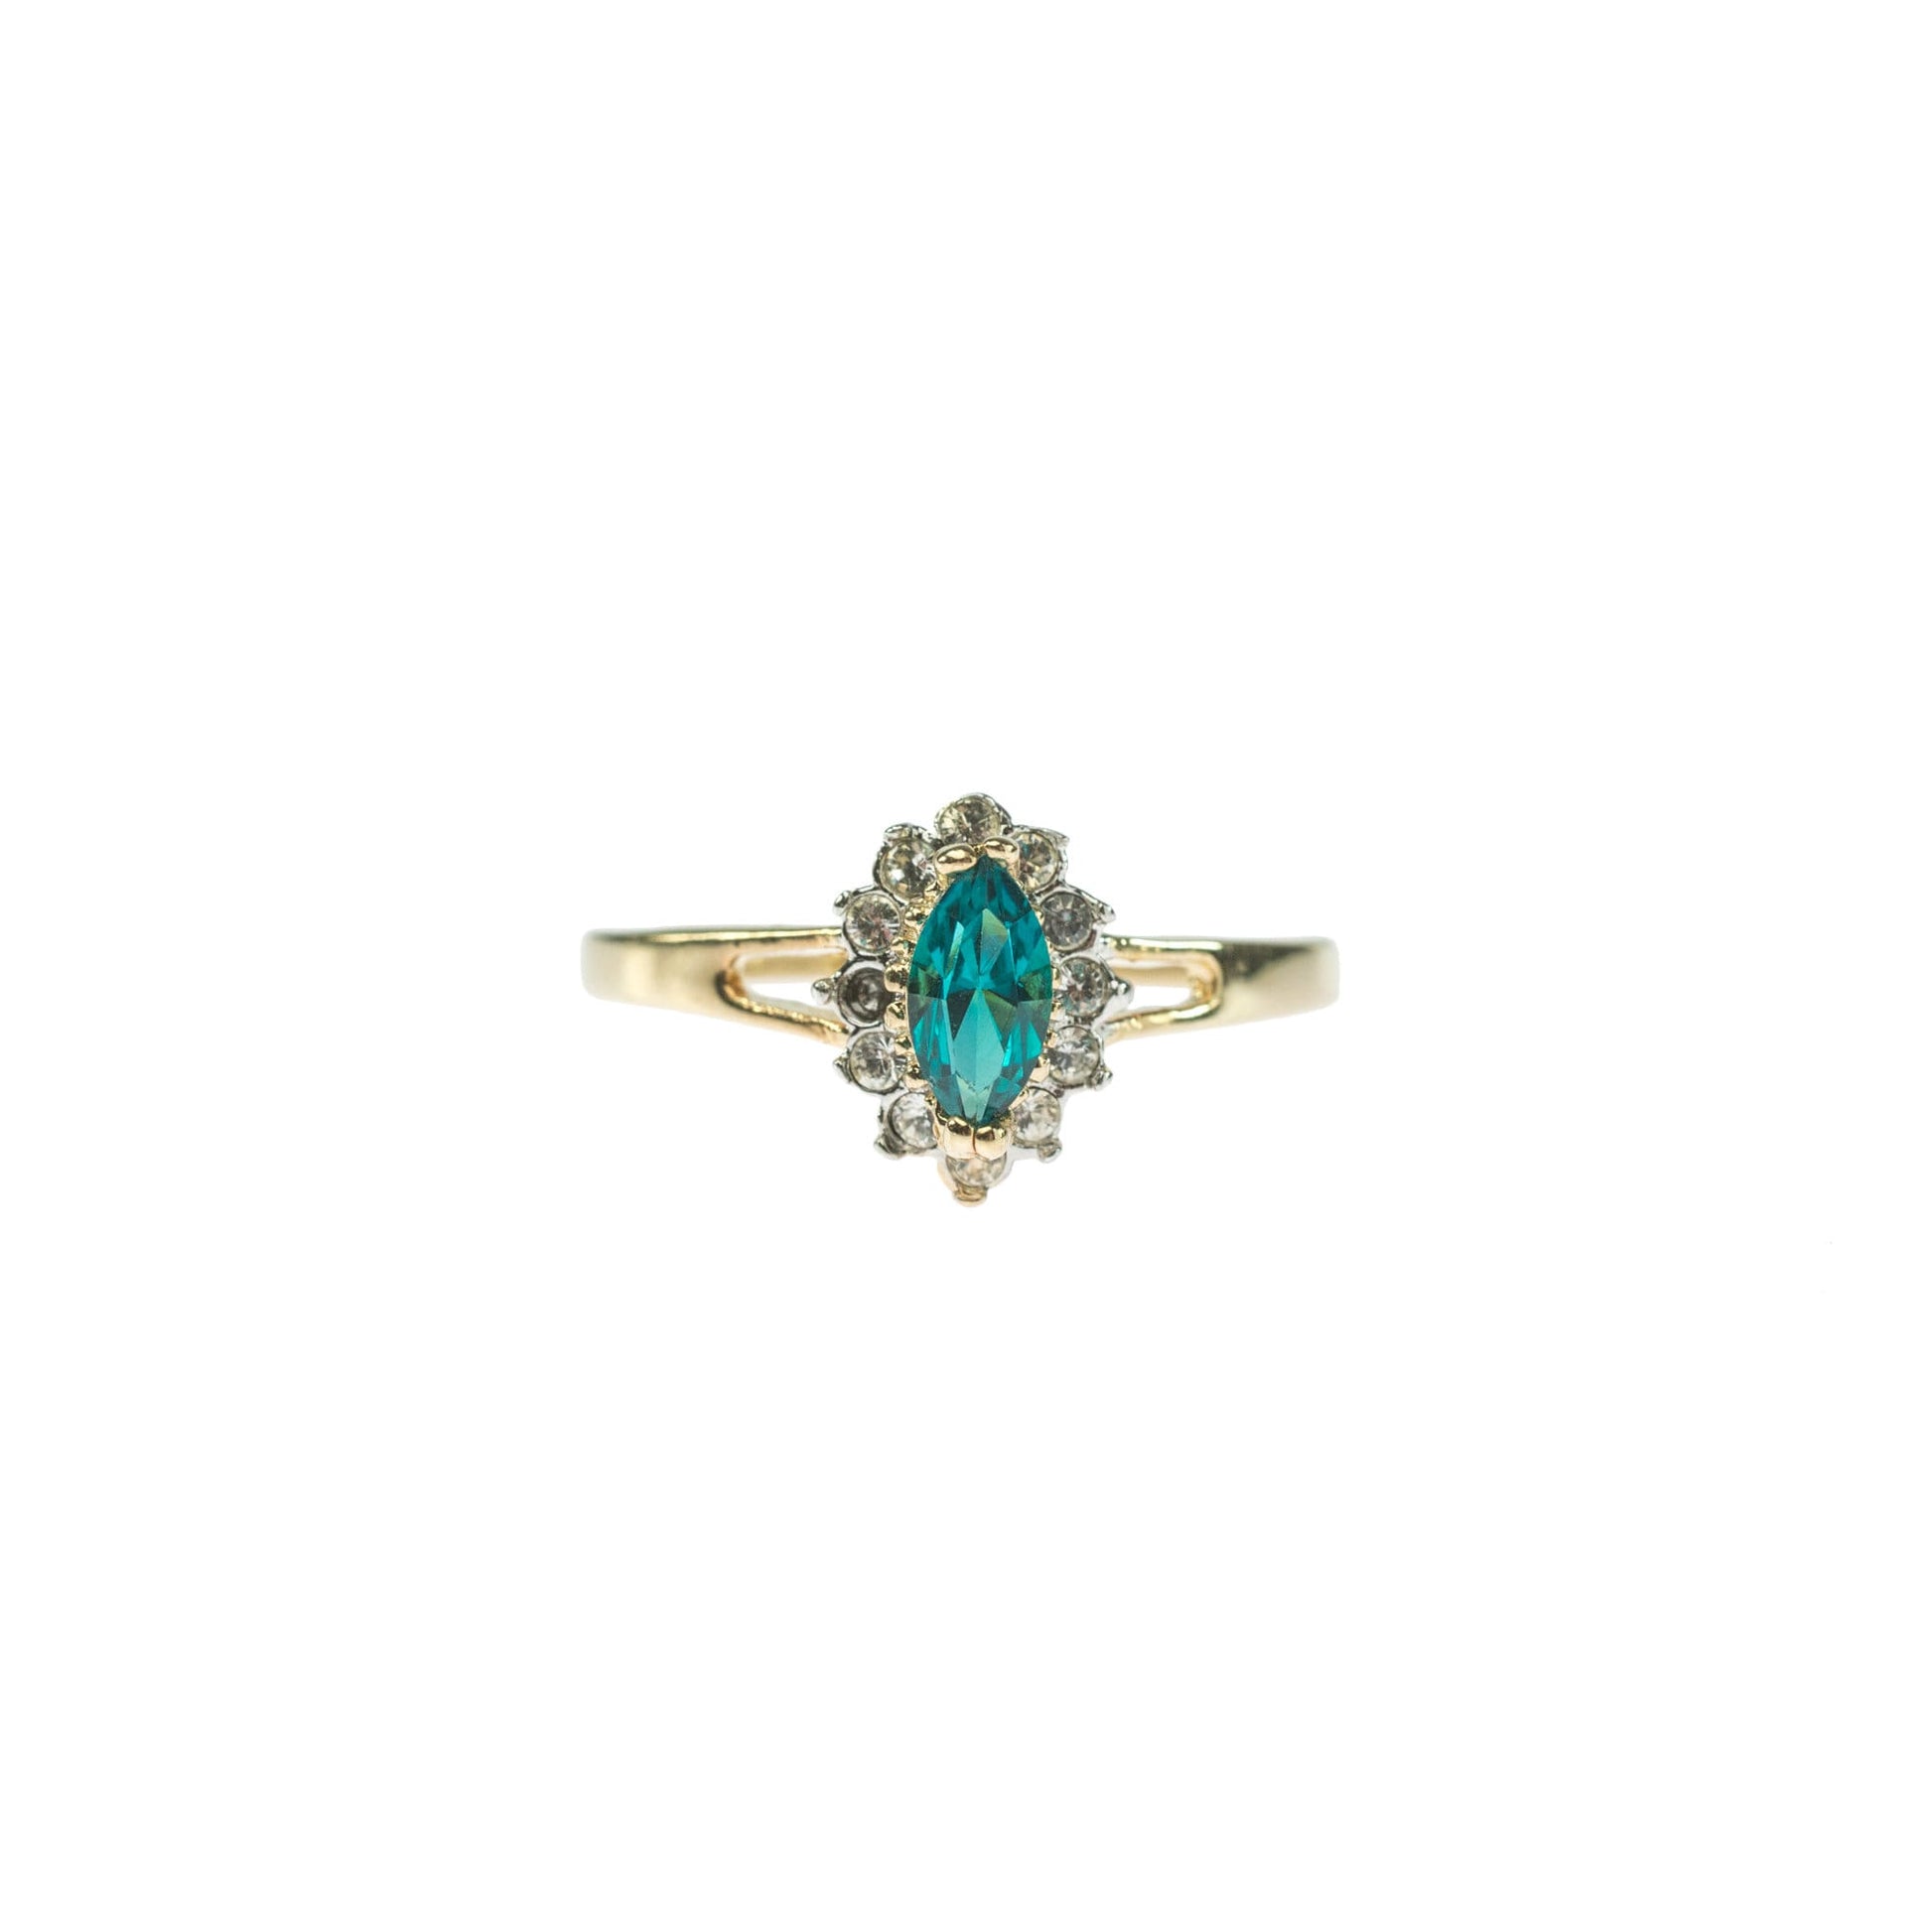 Vintage Ring Zircon and Clear Swarovski Crystals 18kt Gold Antique Womans Jewelry Handmade Dainty Rings #R1314 - Limited Stock - Never Worn